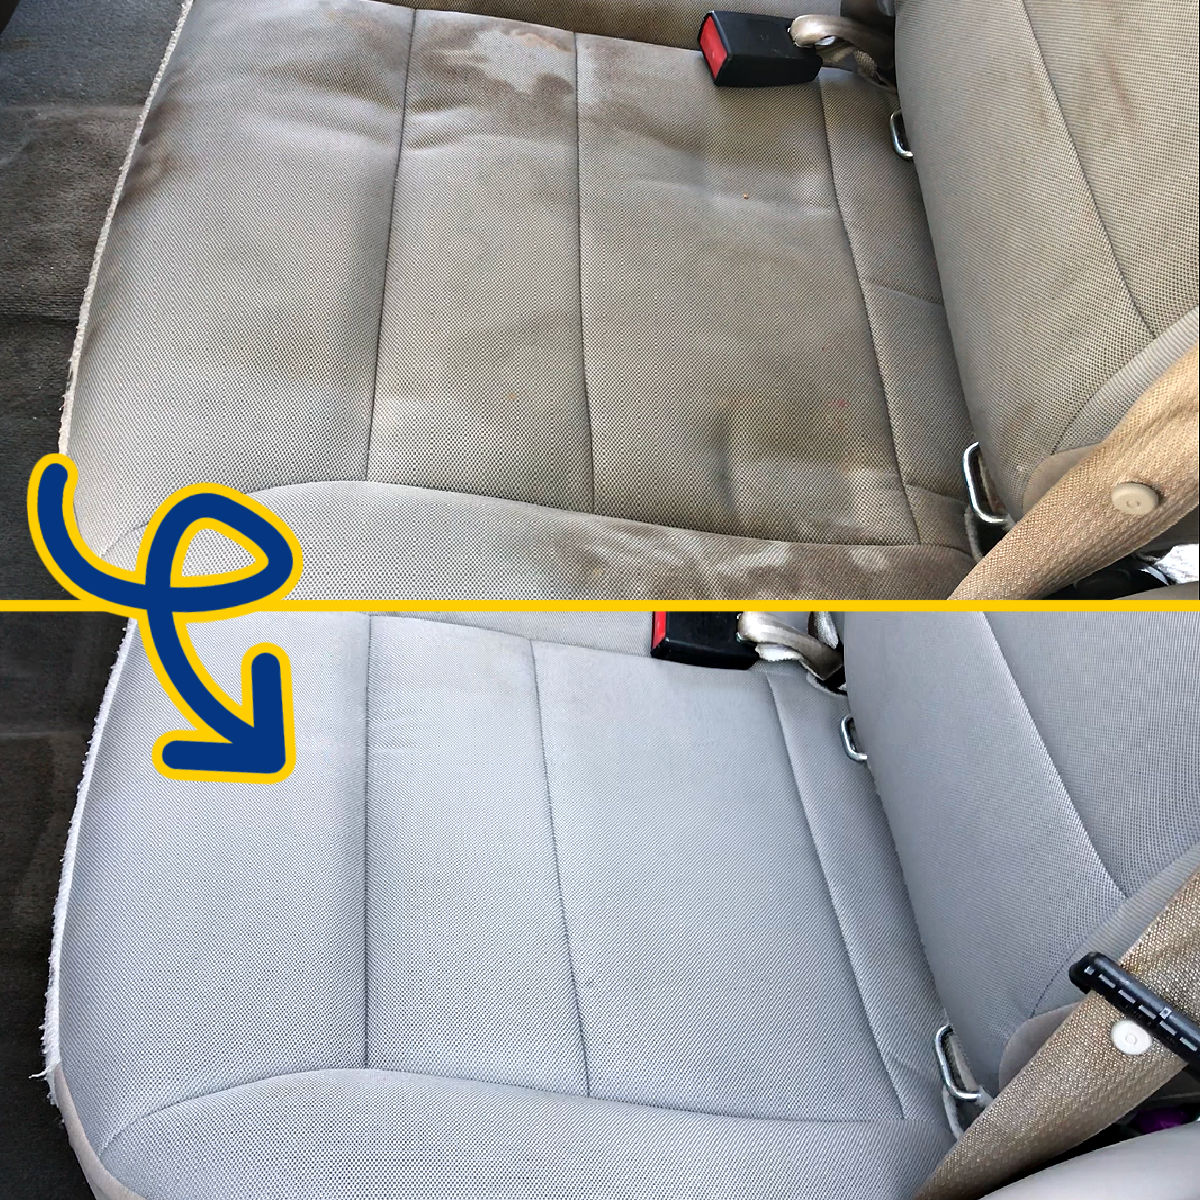 How to clean your fabric car seats, carpet & upholstery.